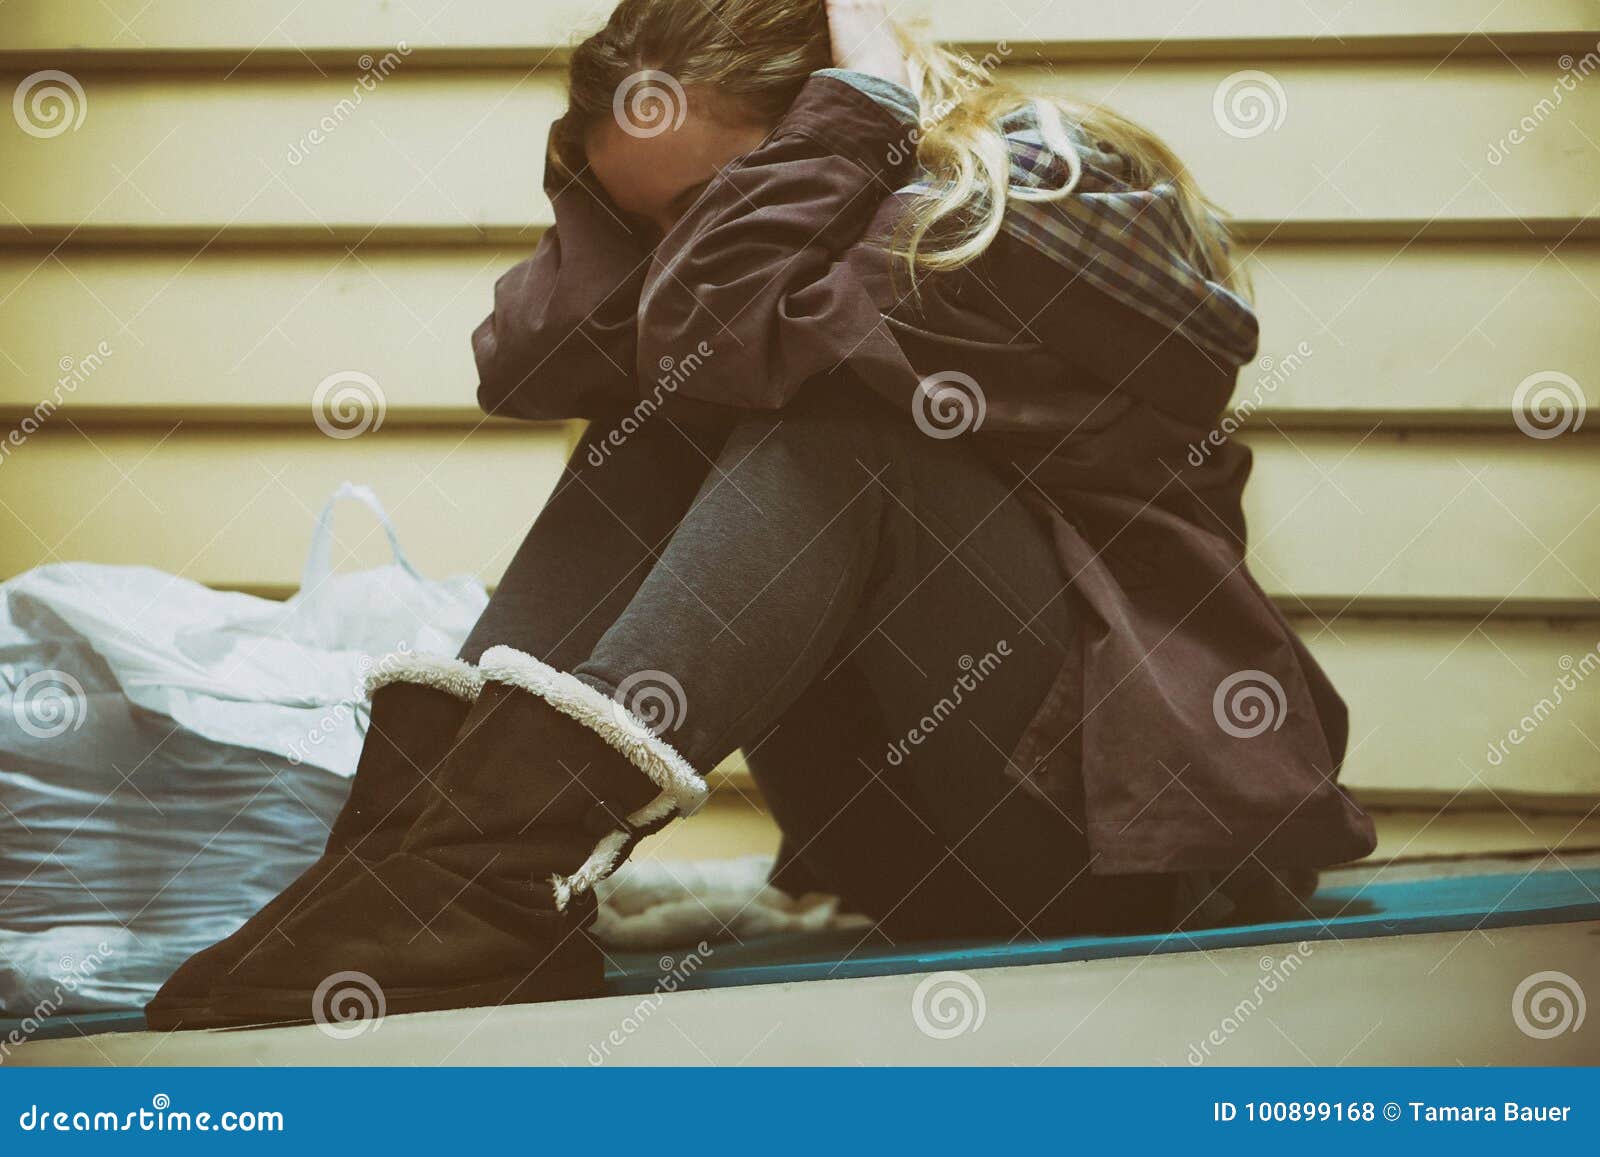 homeless young teen taking shelter